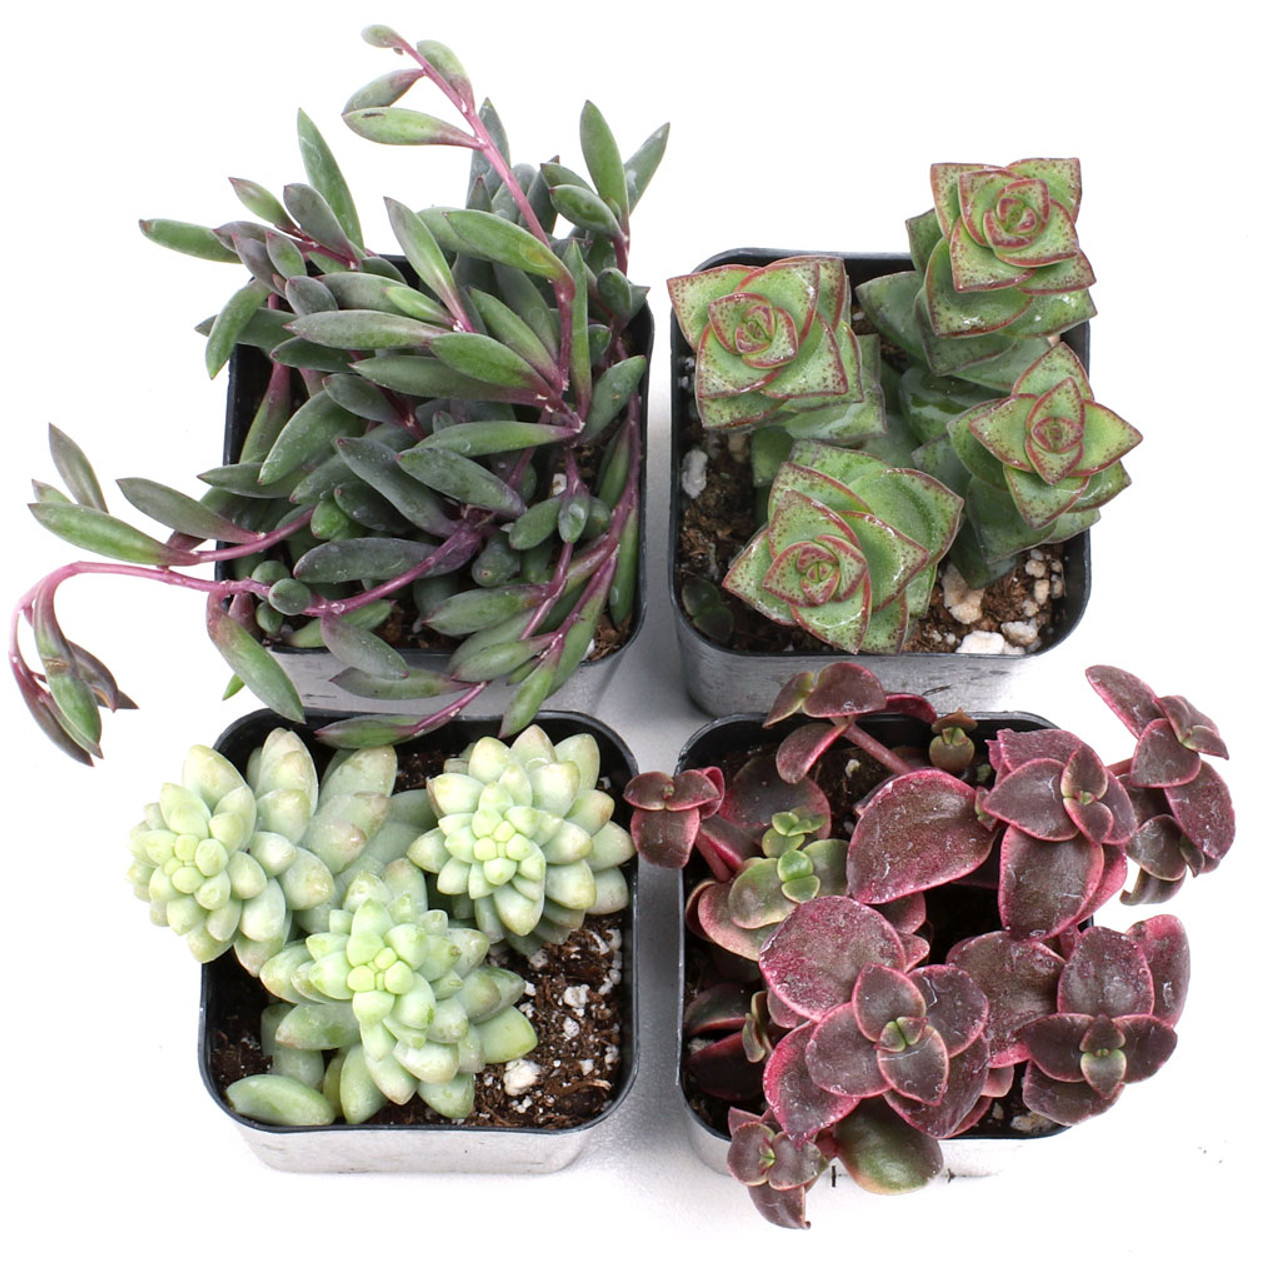 How to Choose The Perfect Pot or Container For Your Succulents